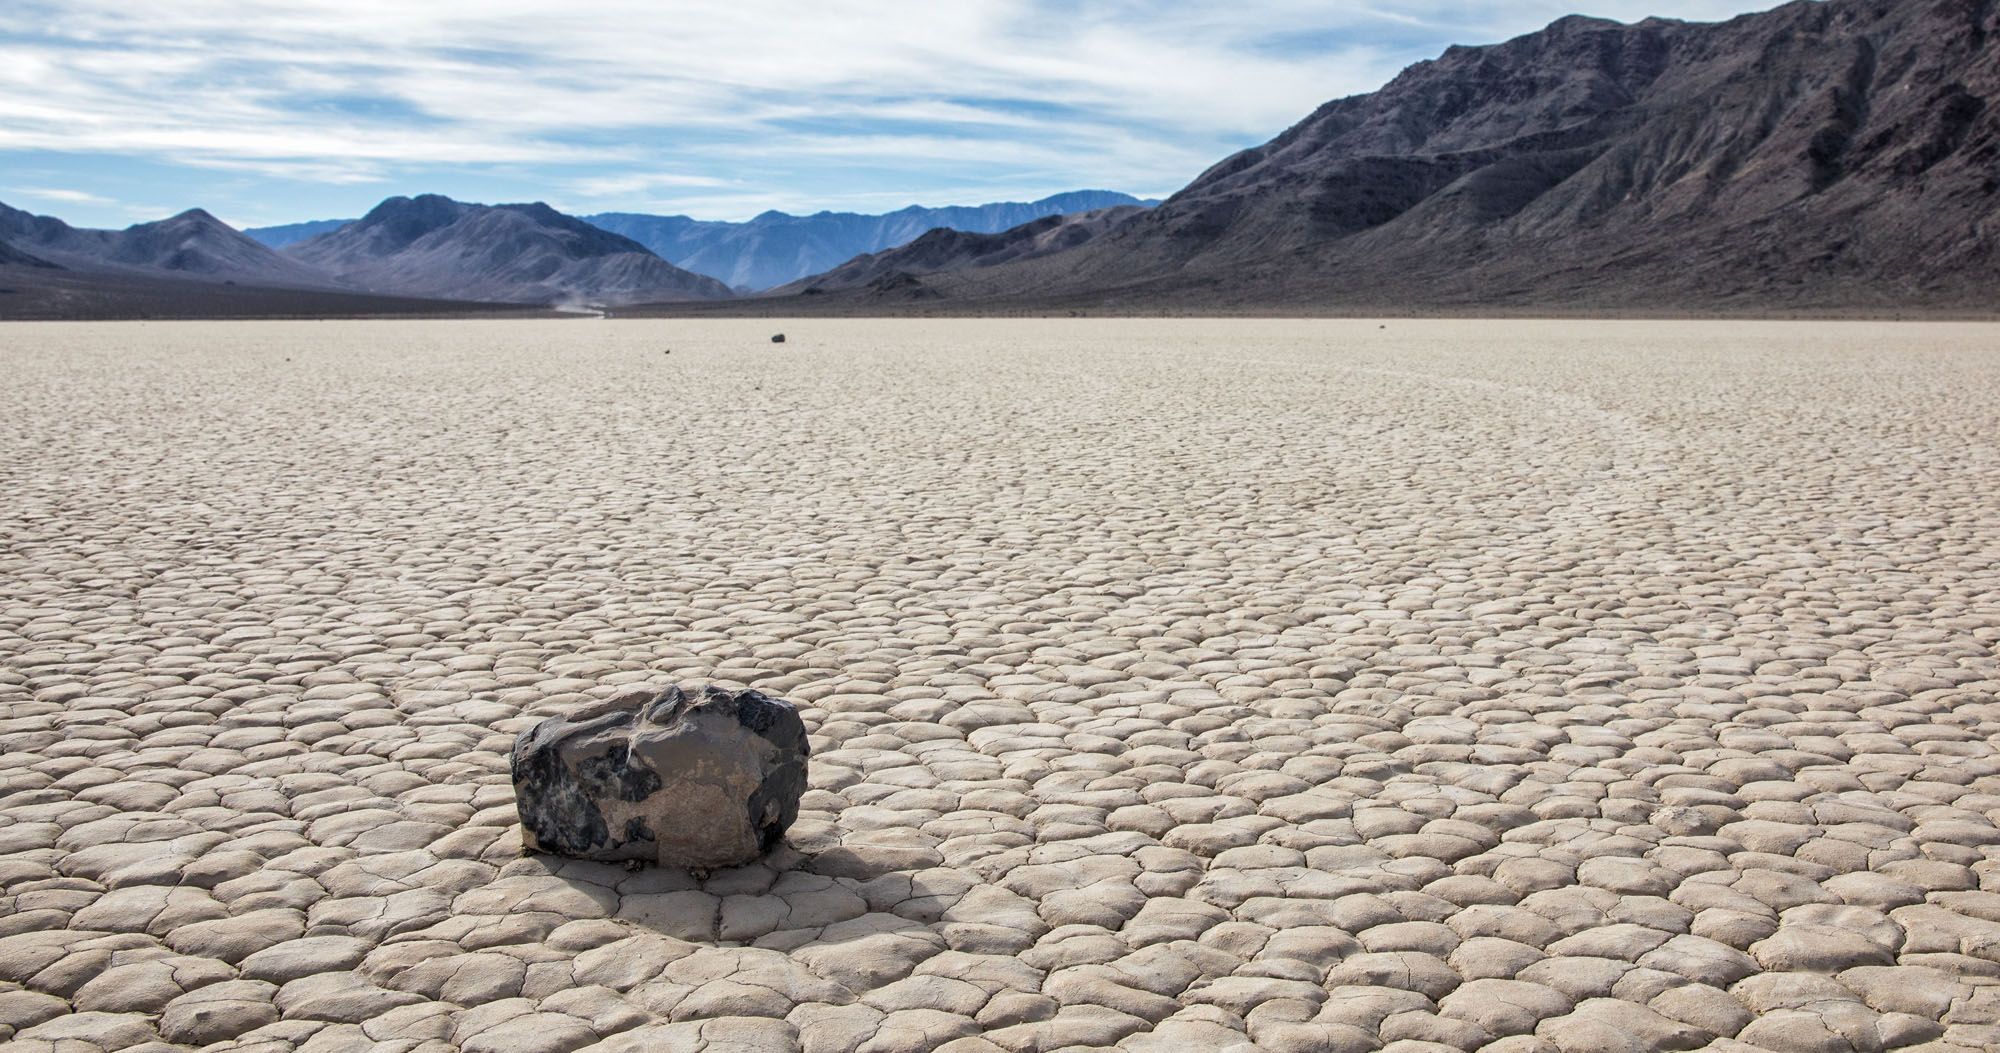 Featured image for “How to Visit Racetrack Playa in Death Valley National Park”